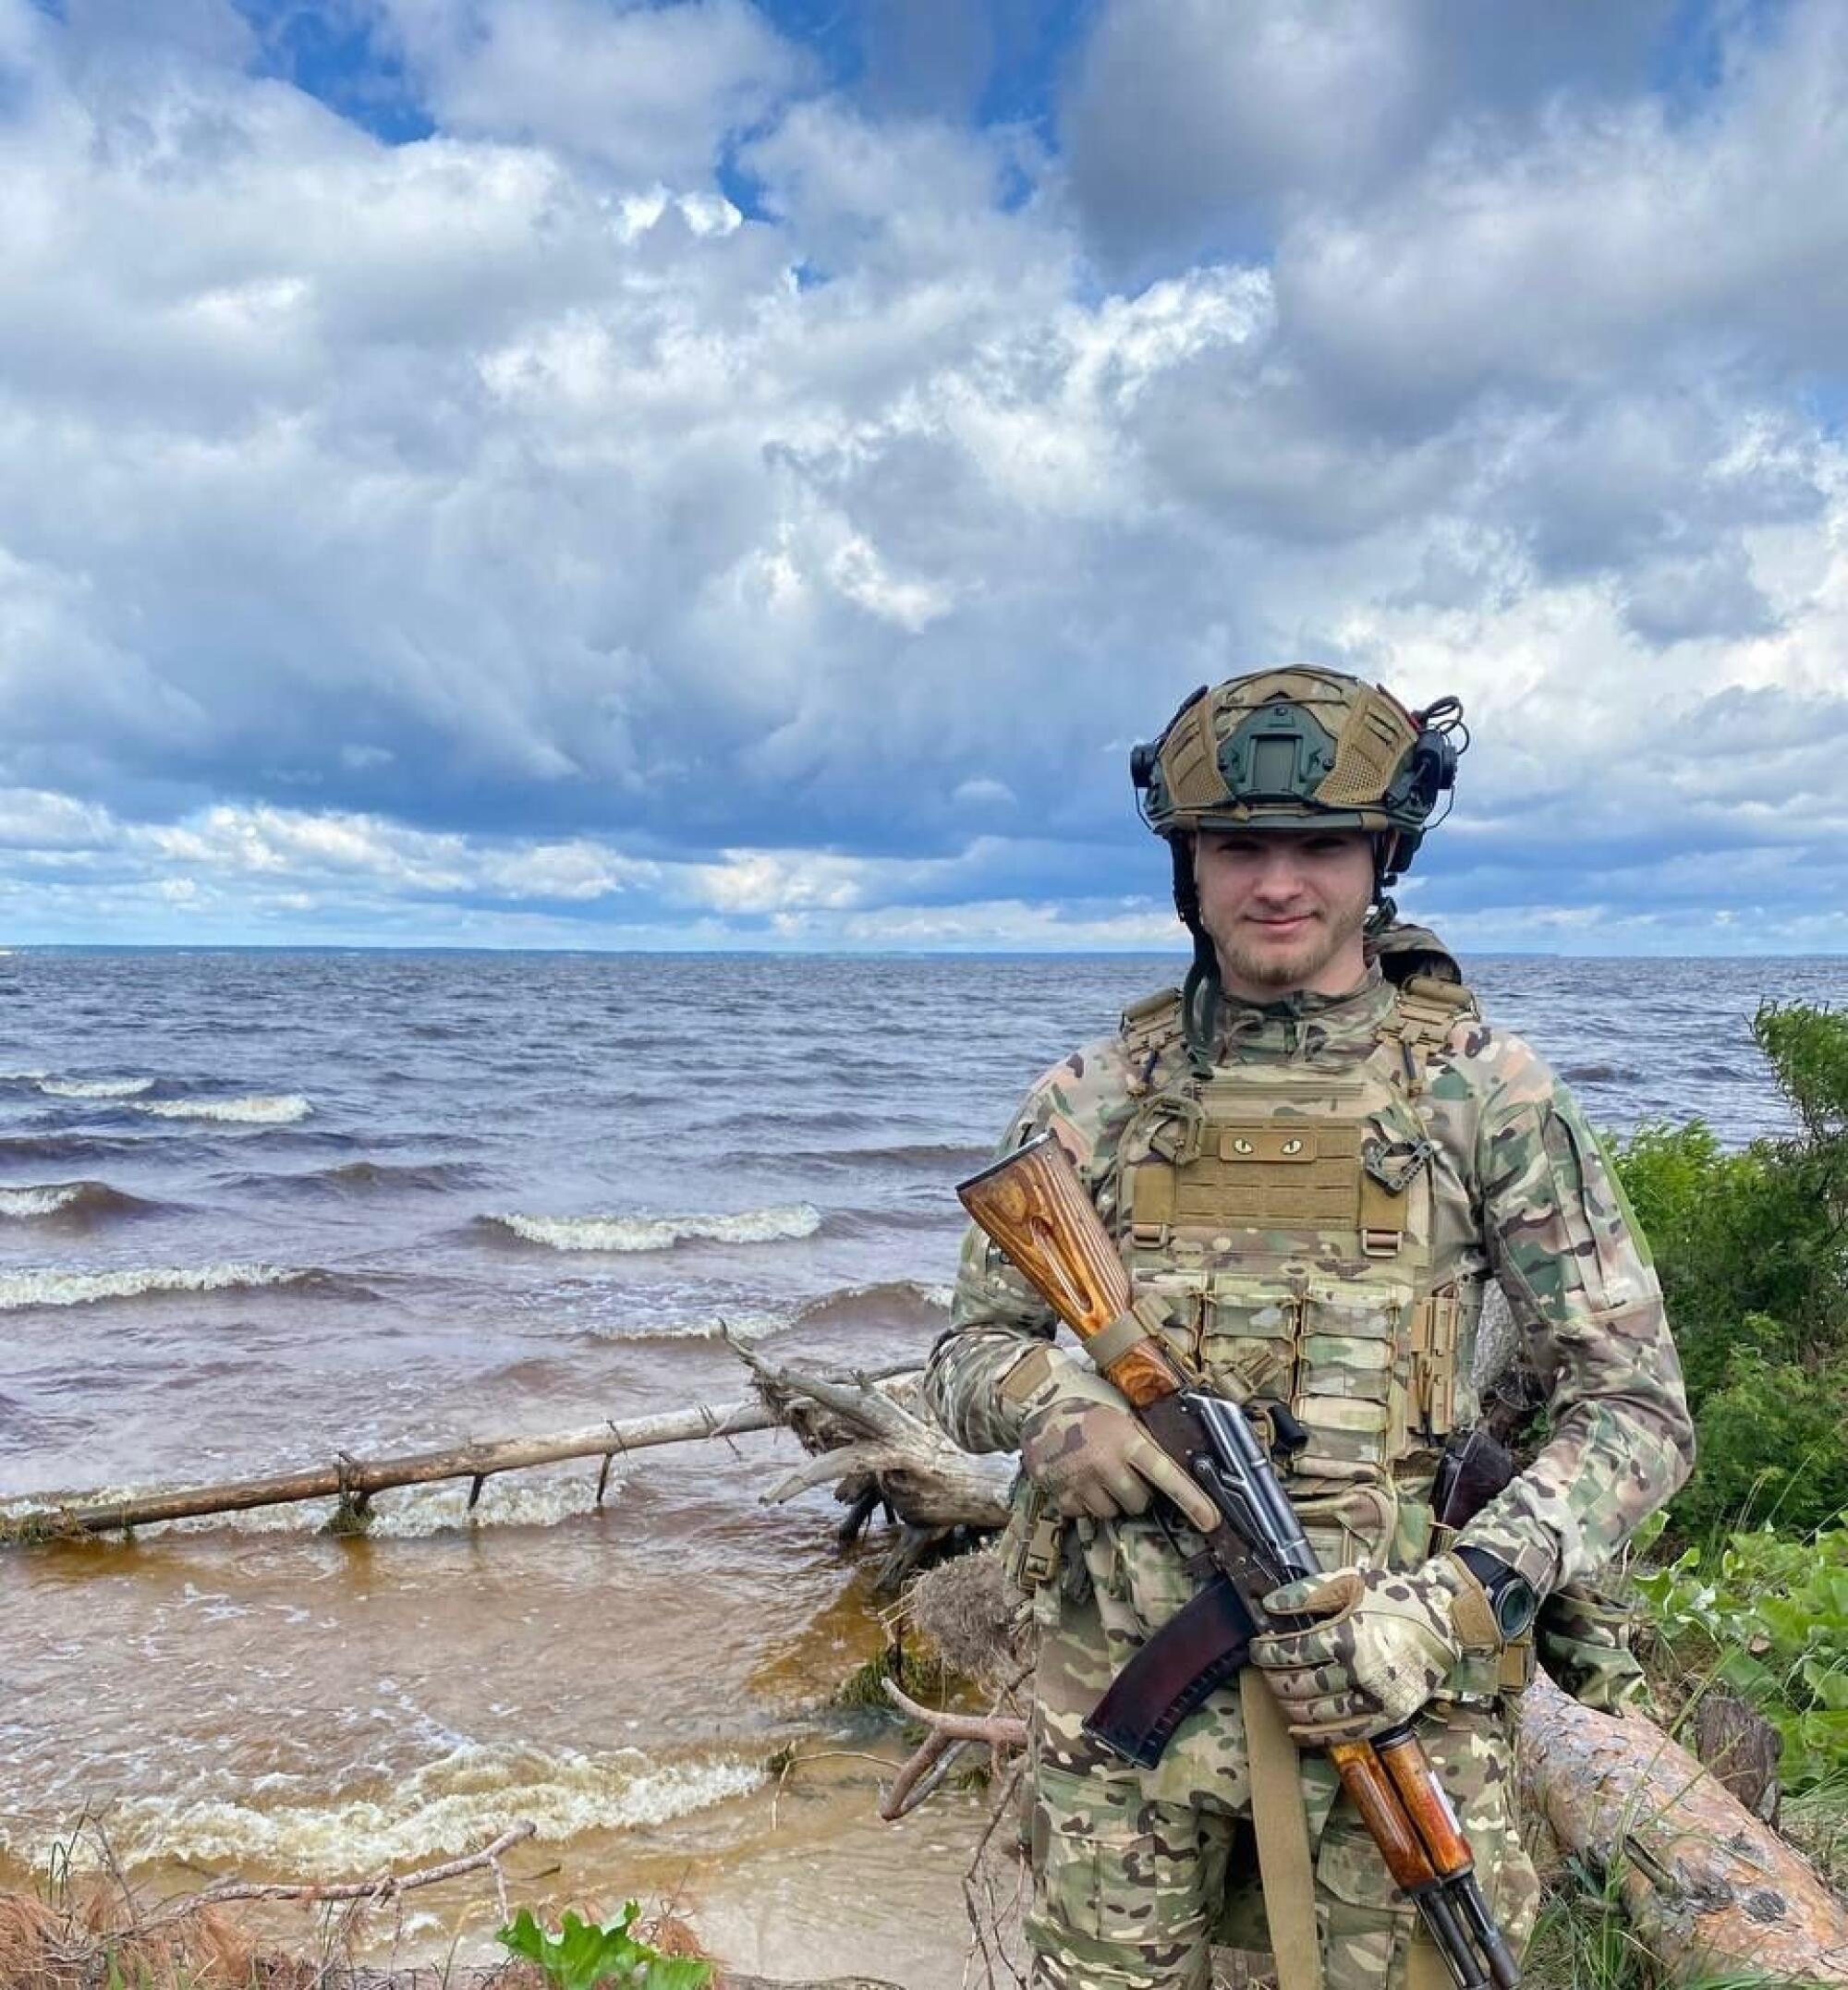 Oleksandr Kovalchuk during his time in the 12th Special Forces Brigade Azov of the National Guard of Ukraine.